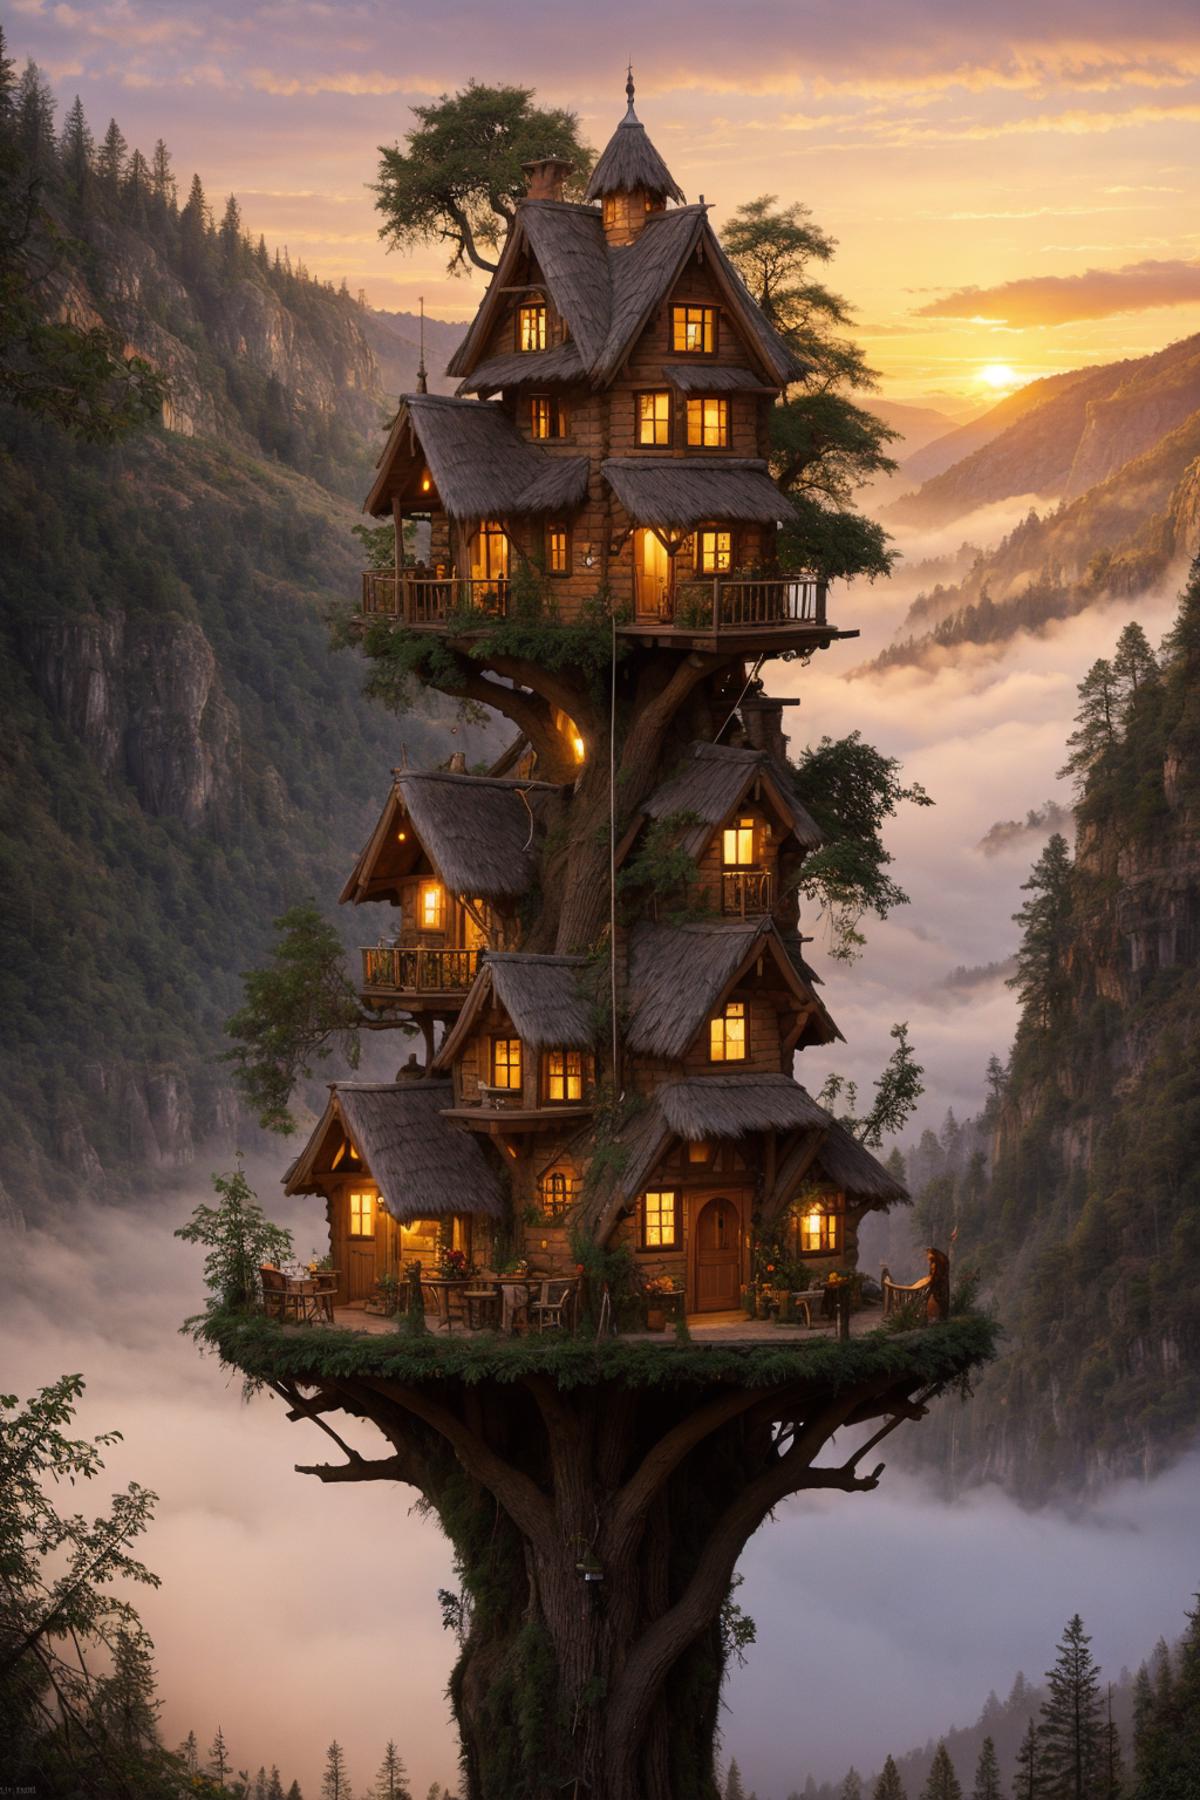 Illustration of a large tree house with multiple rooms and a hanging balcony.